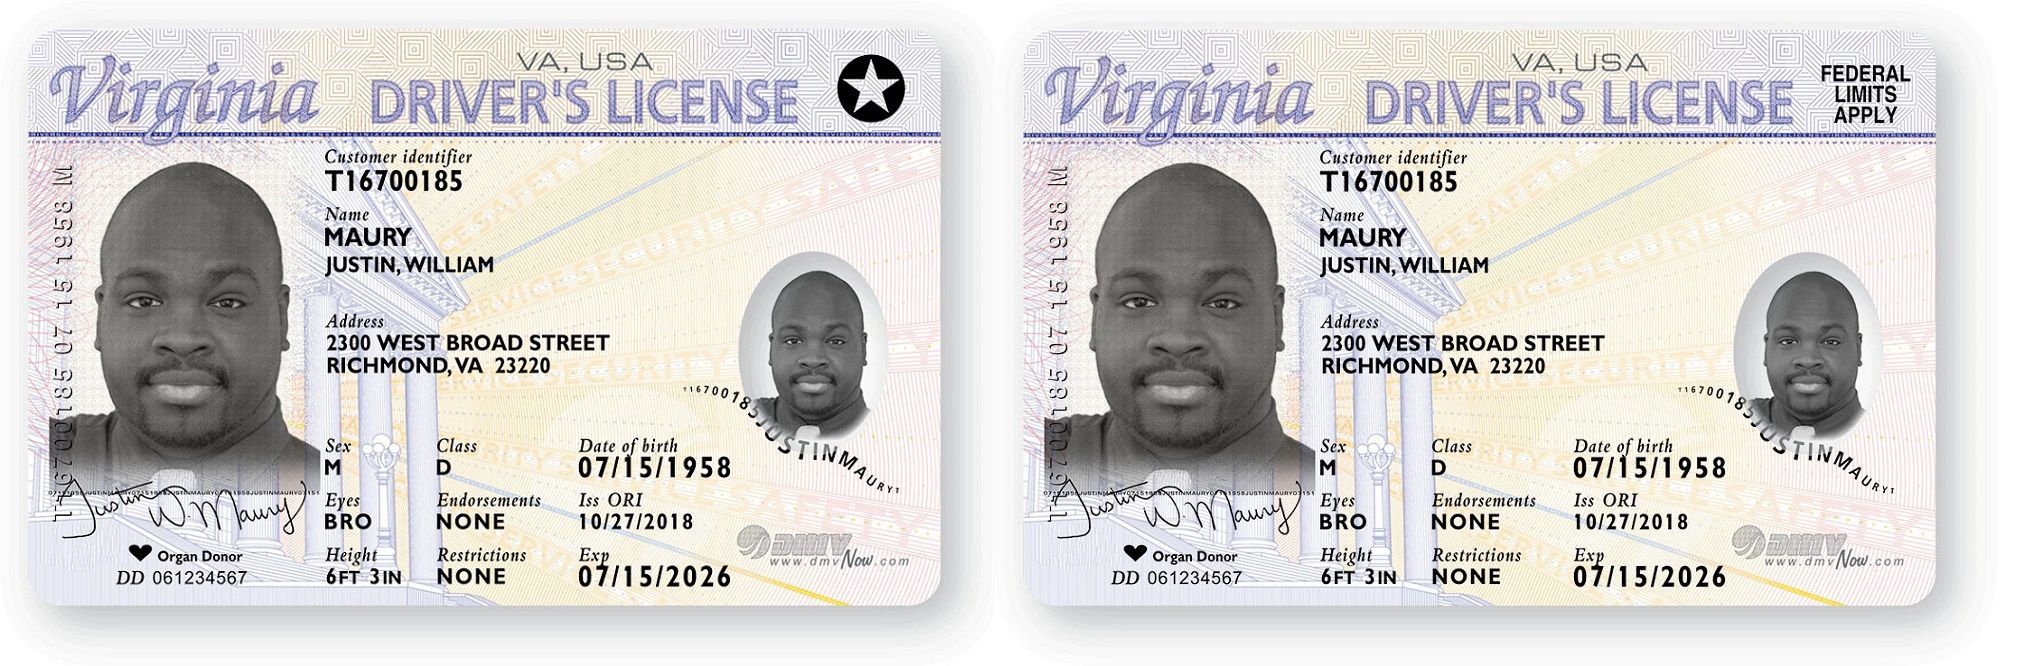 a server may seize a fake id as long as